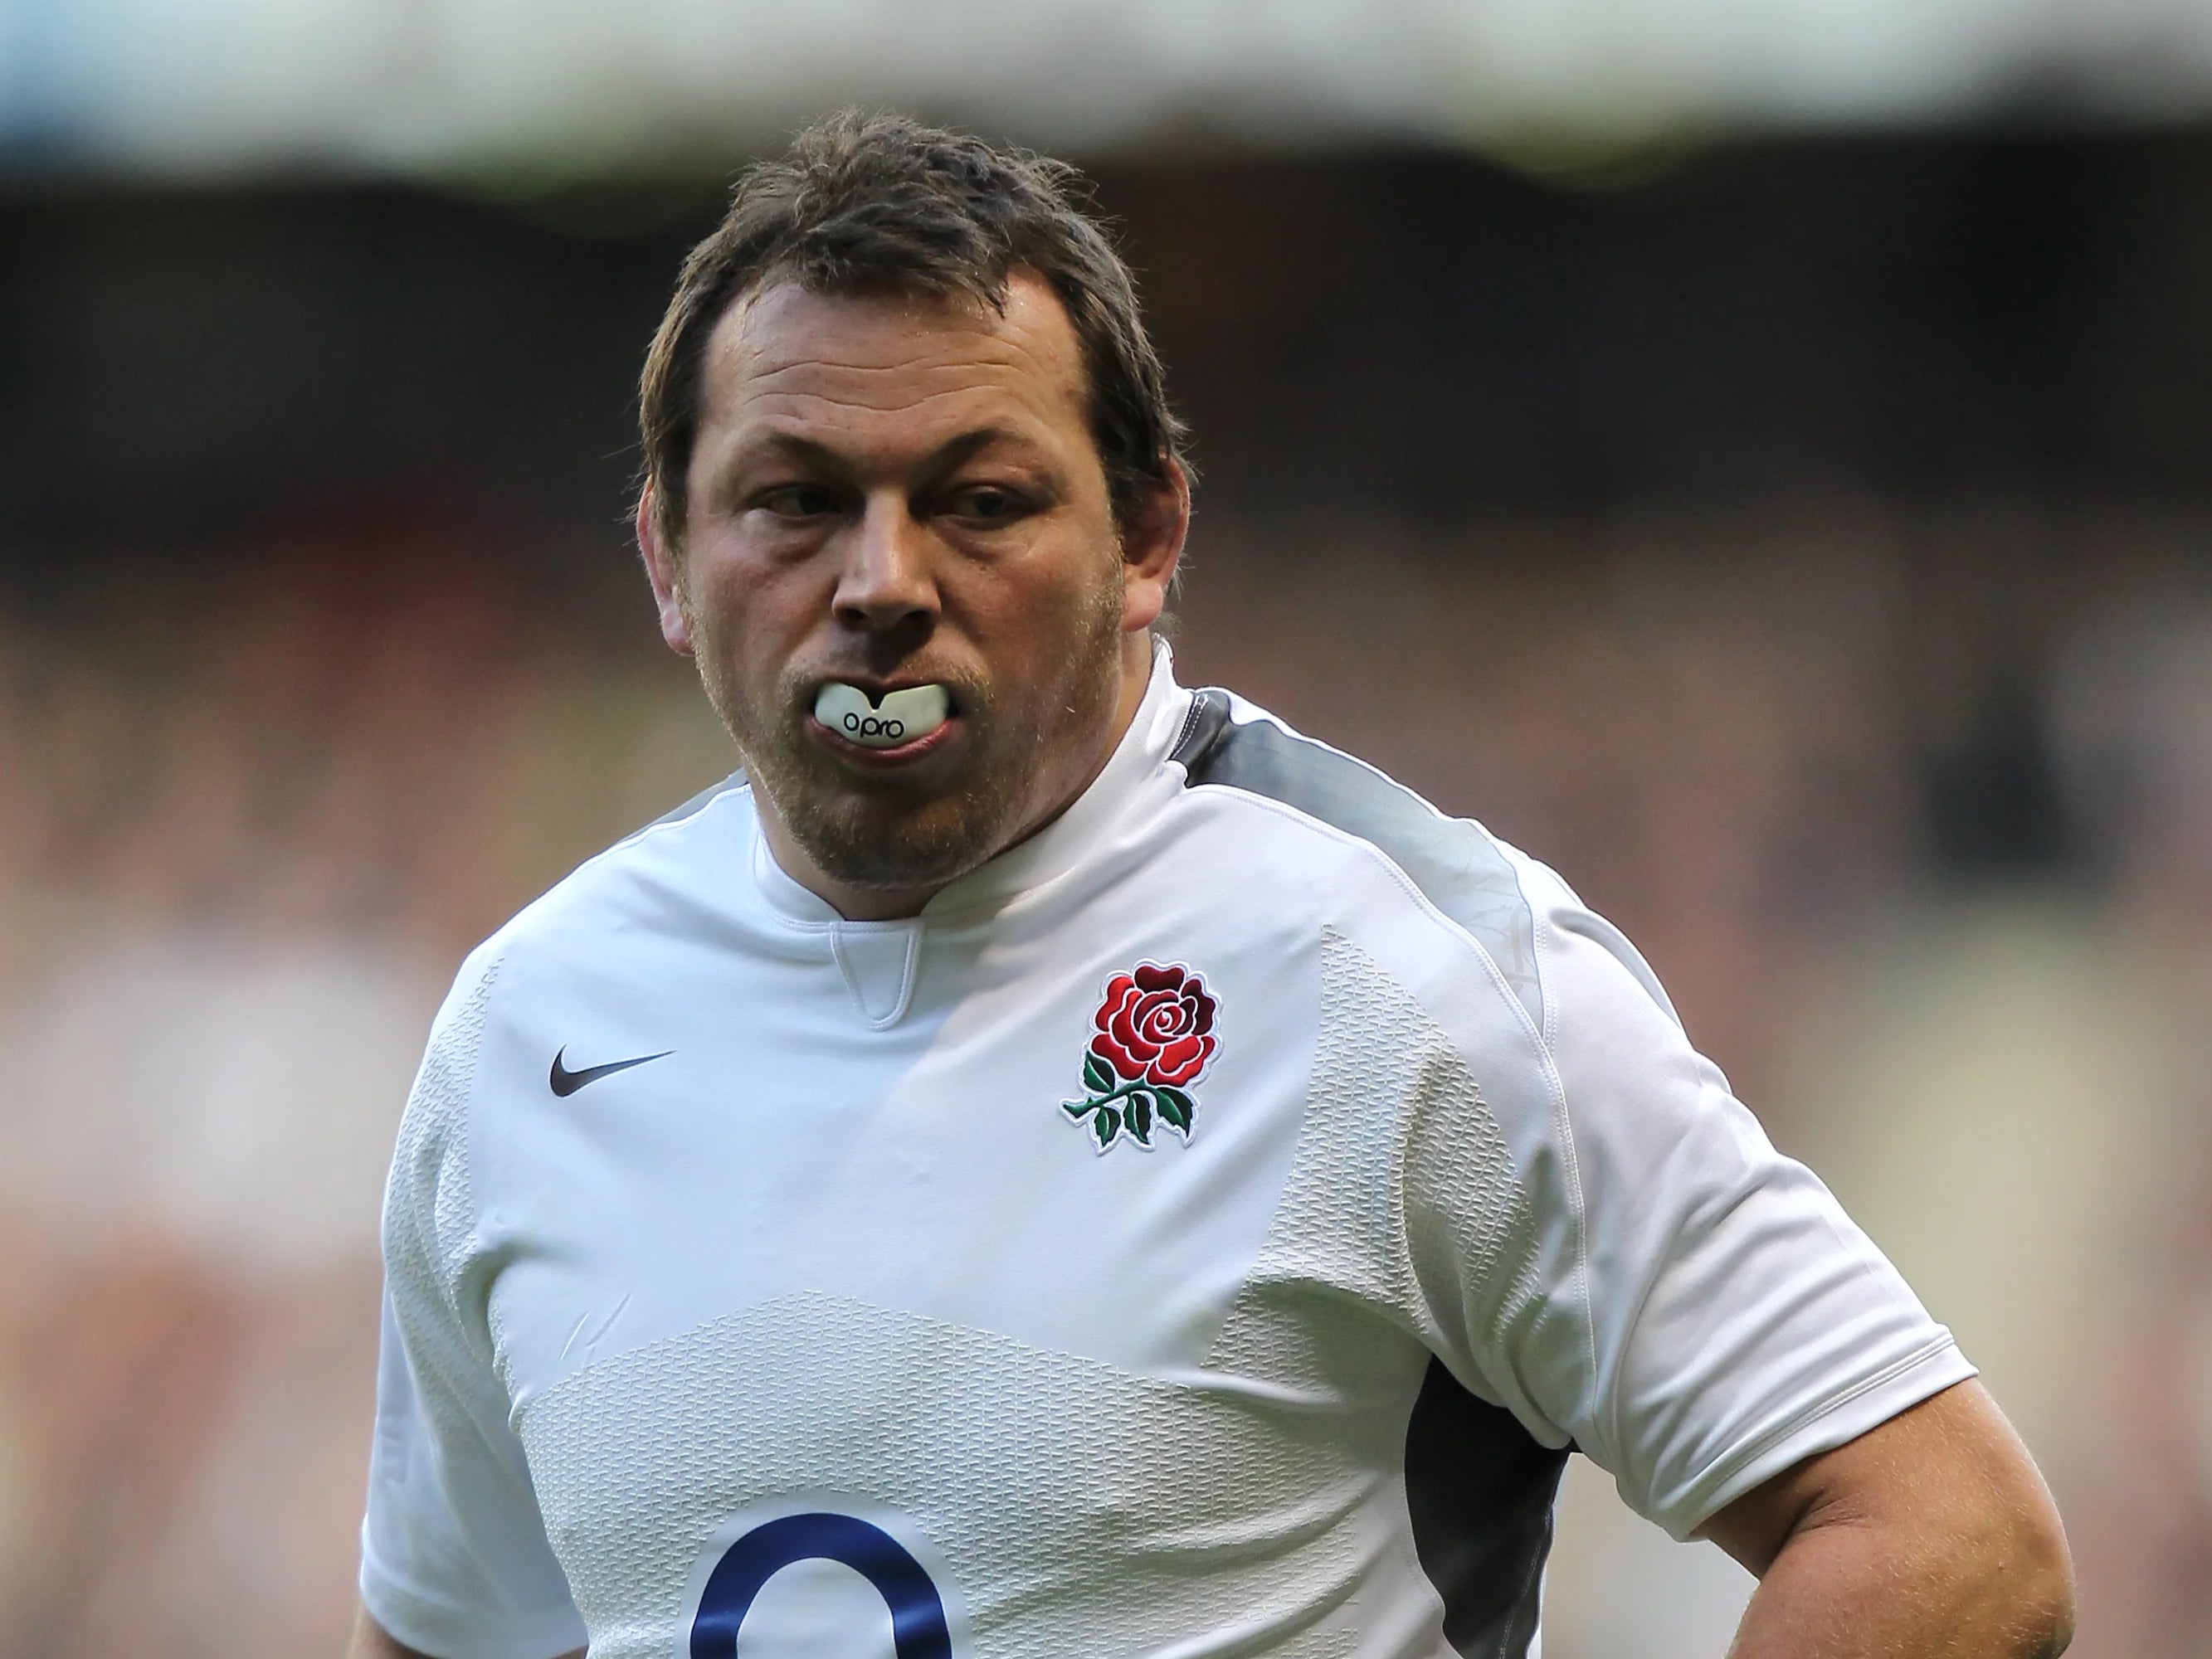 Former England hooker Steve Thompson has been diagnosed with early-onset dementia